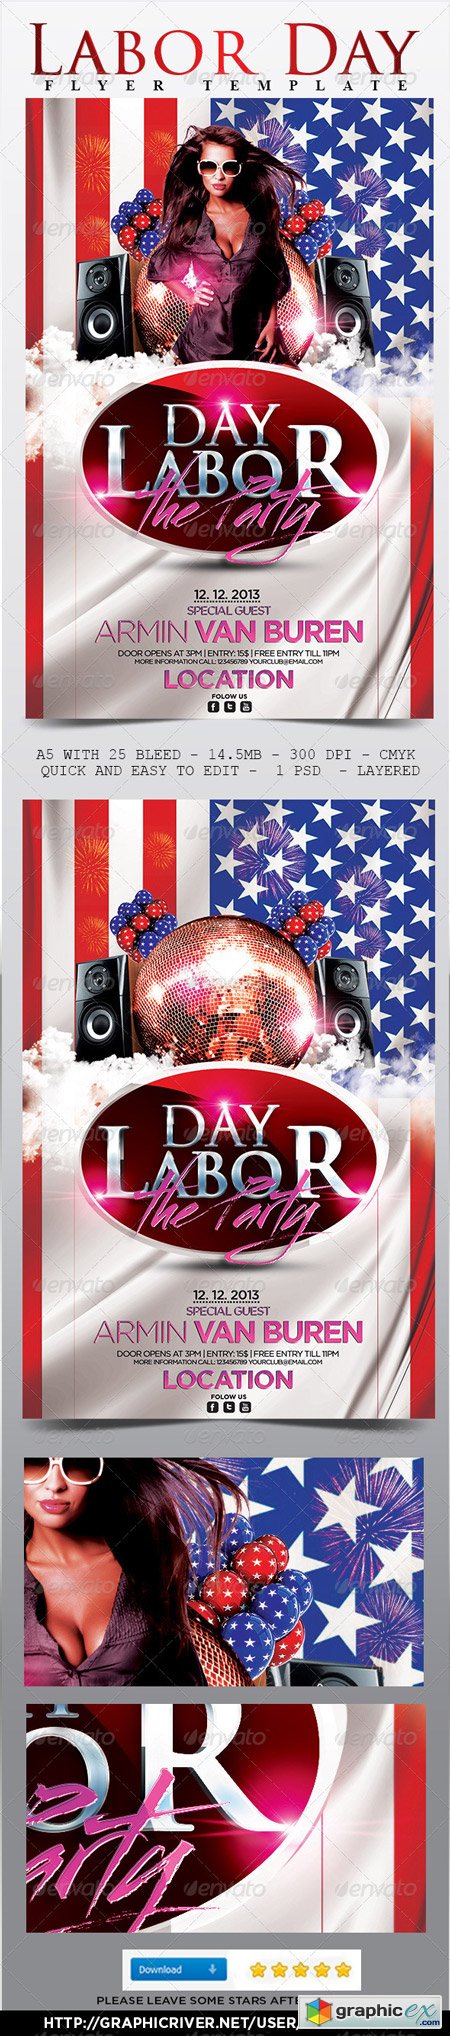 Labor Day Flyer Template 5387832